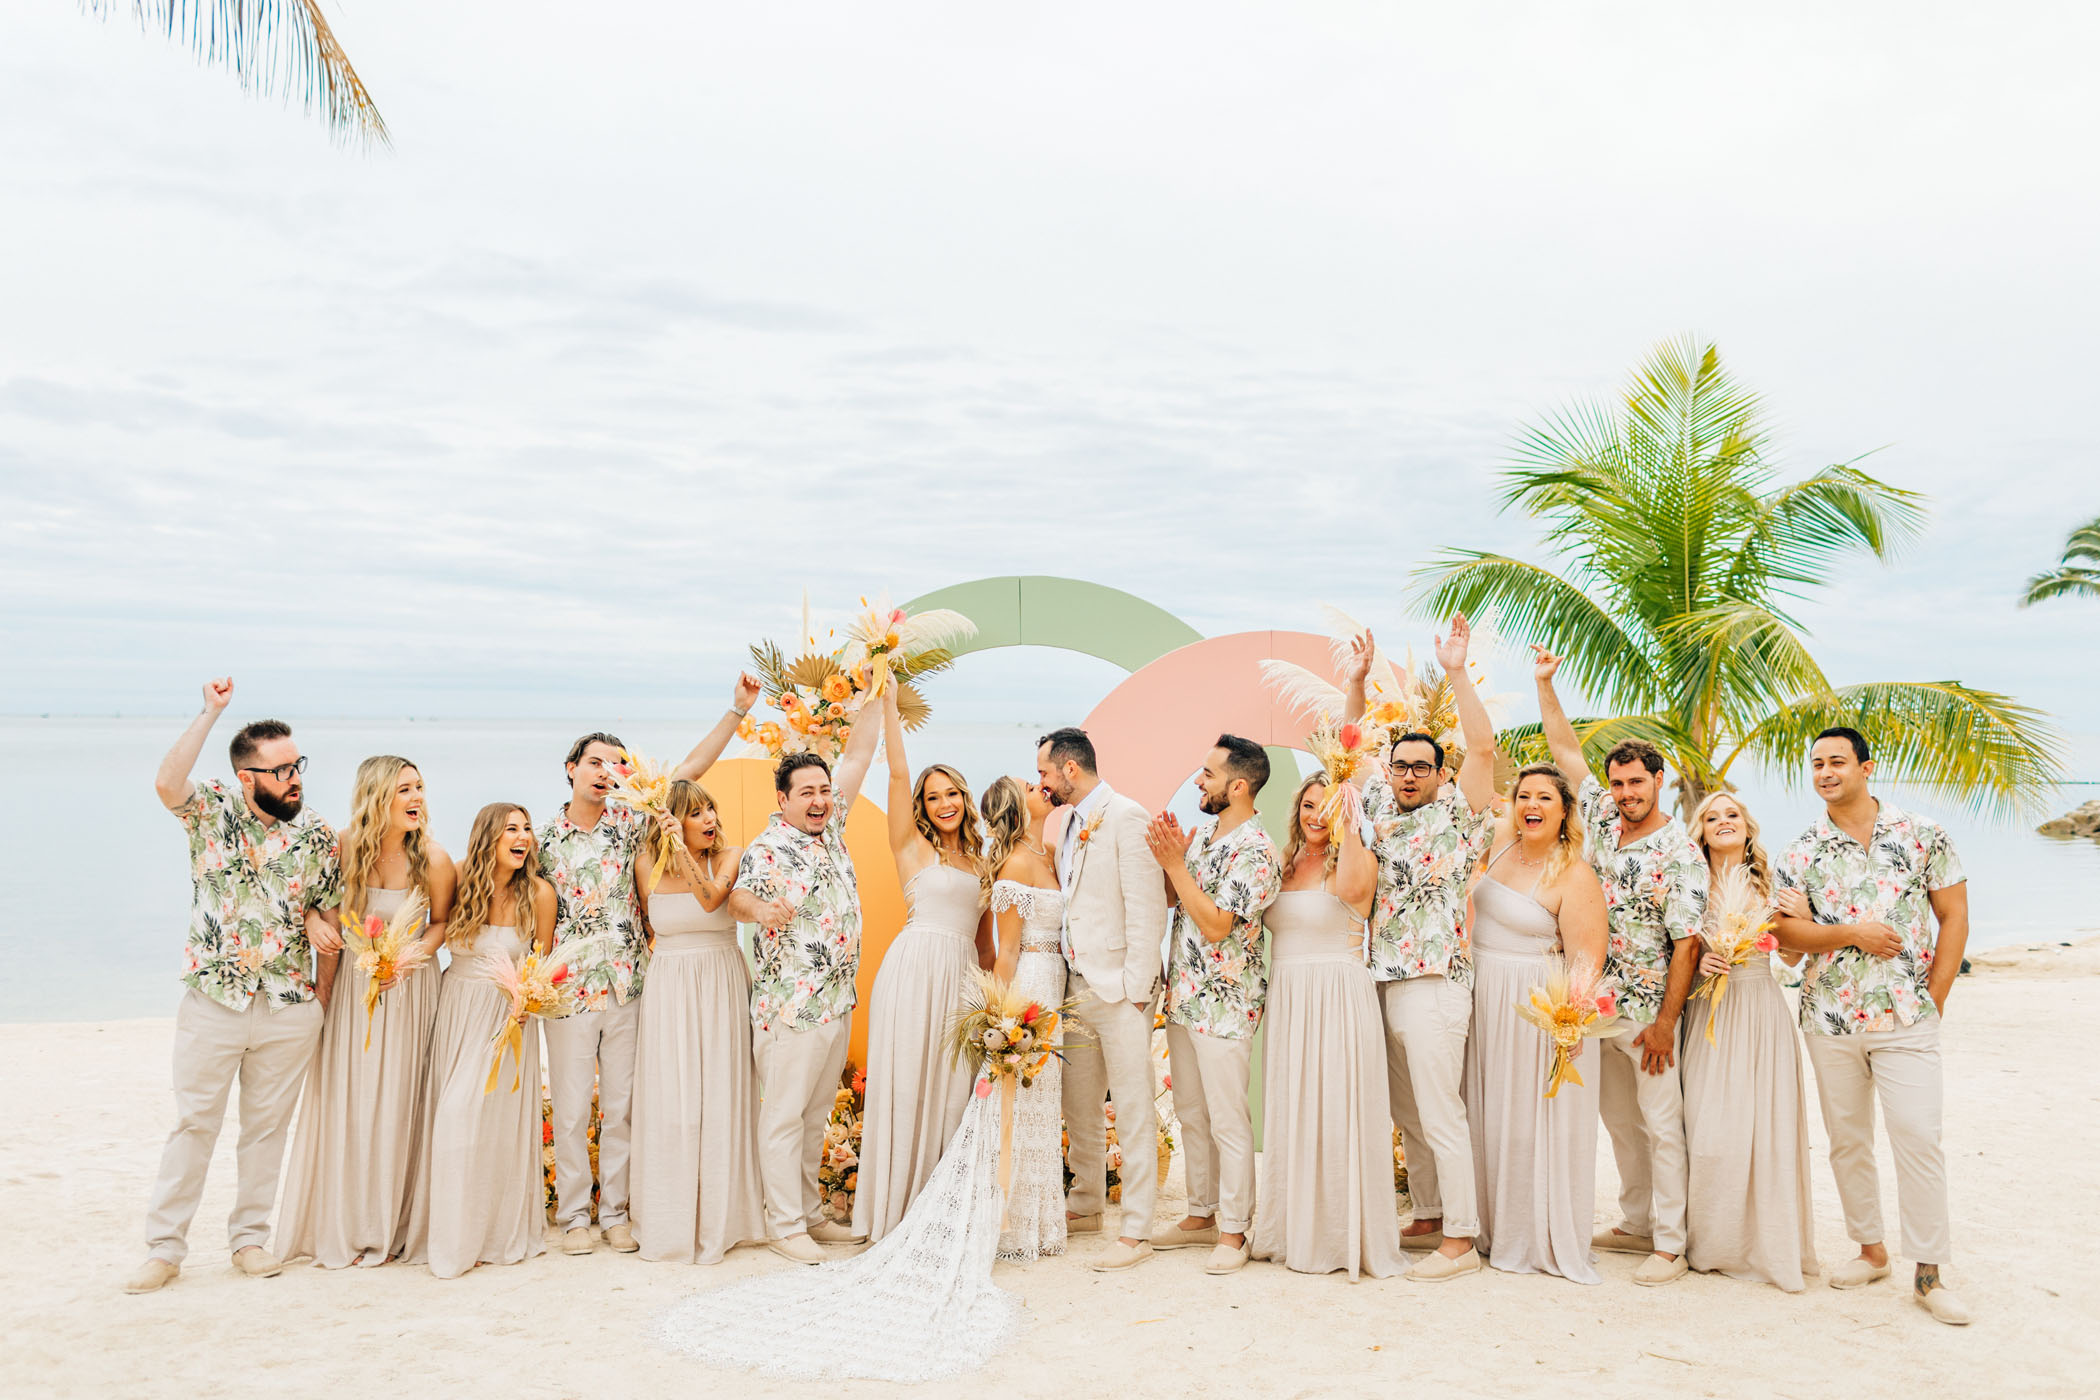 Wedding party in floral shirts and tan dresses